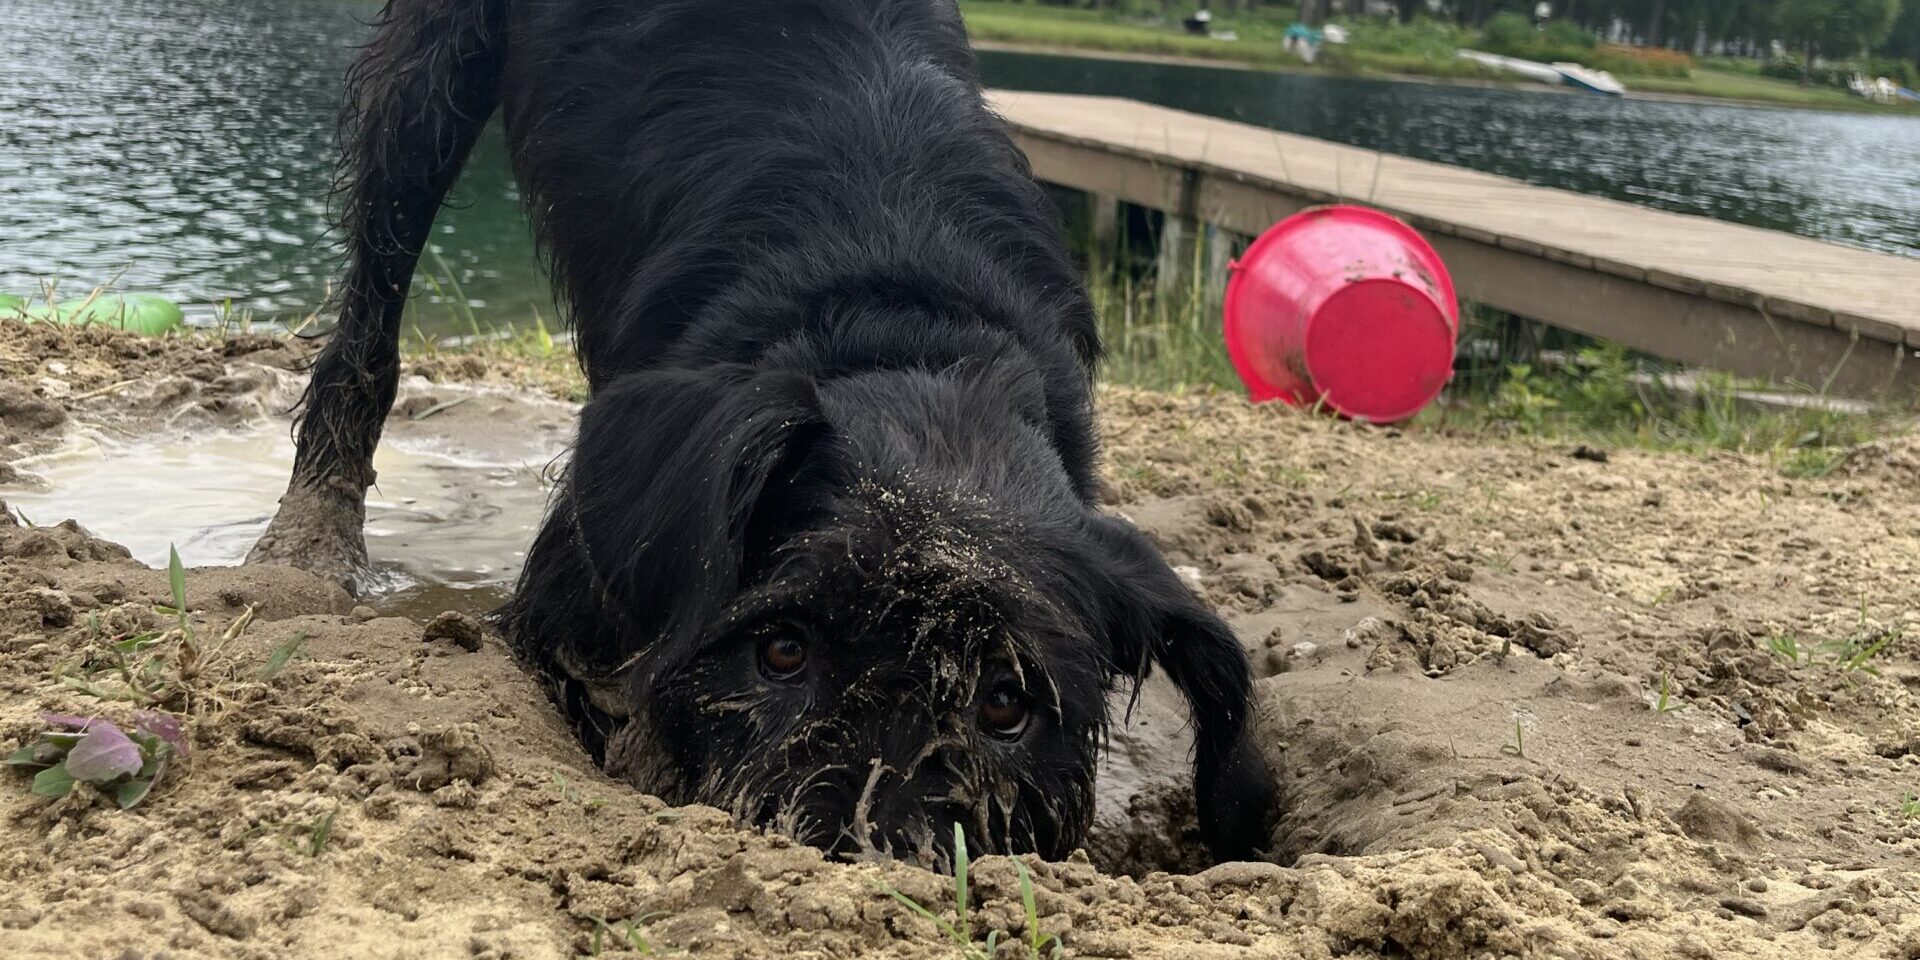 A dog with black hair digging a hole in the sand on a beach near a lake.